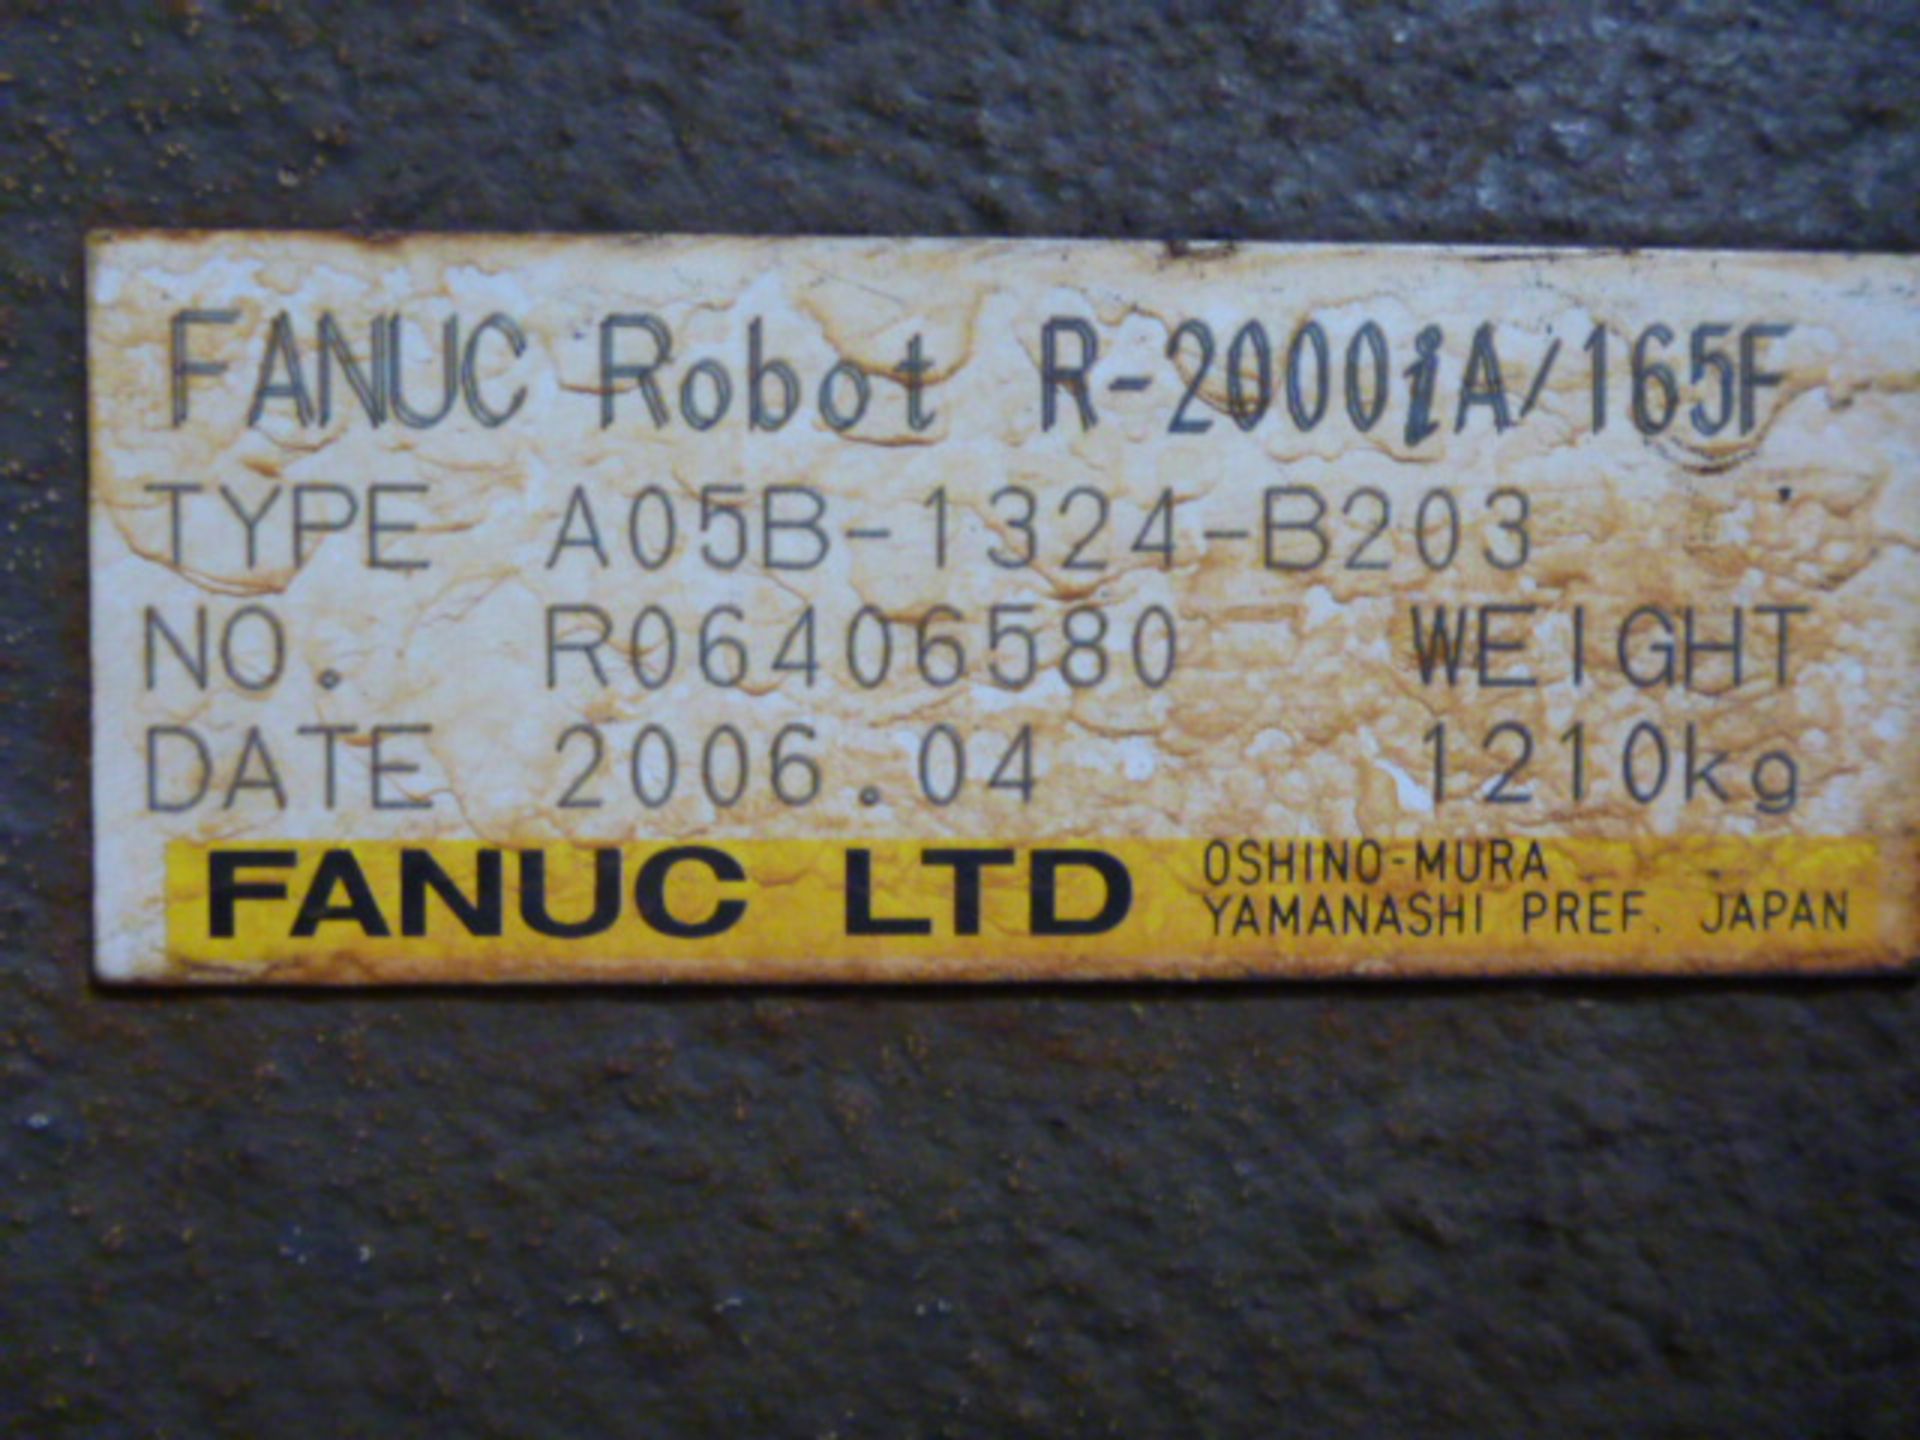 Fanuc R-2000iA Robotic Pick & Place with Fixed Spot Welder (2006) GS06A - Image 4 of 9